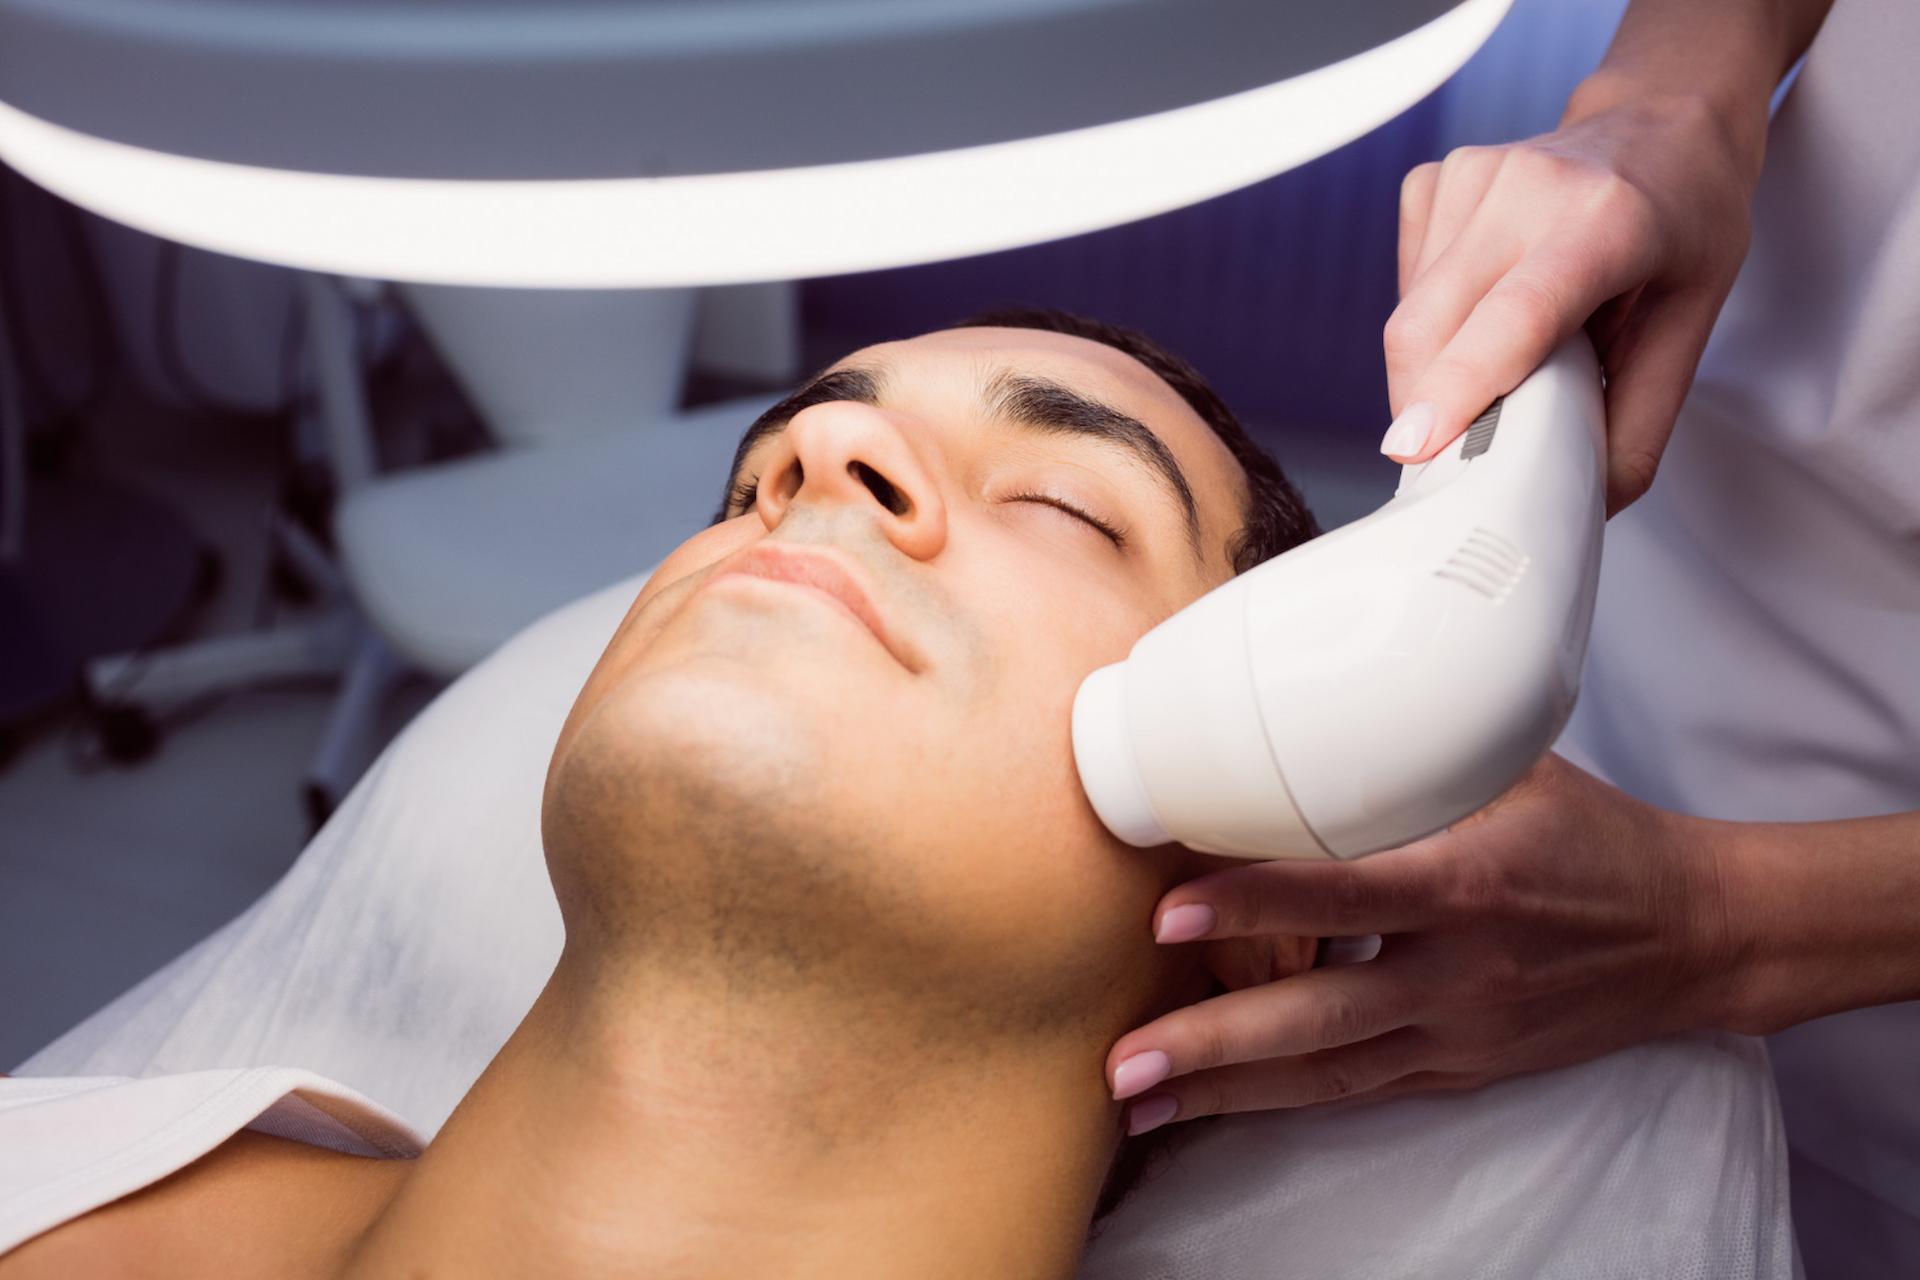 What Do Males Need To Know About Laser Hair Removal For Men?